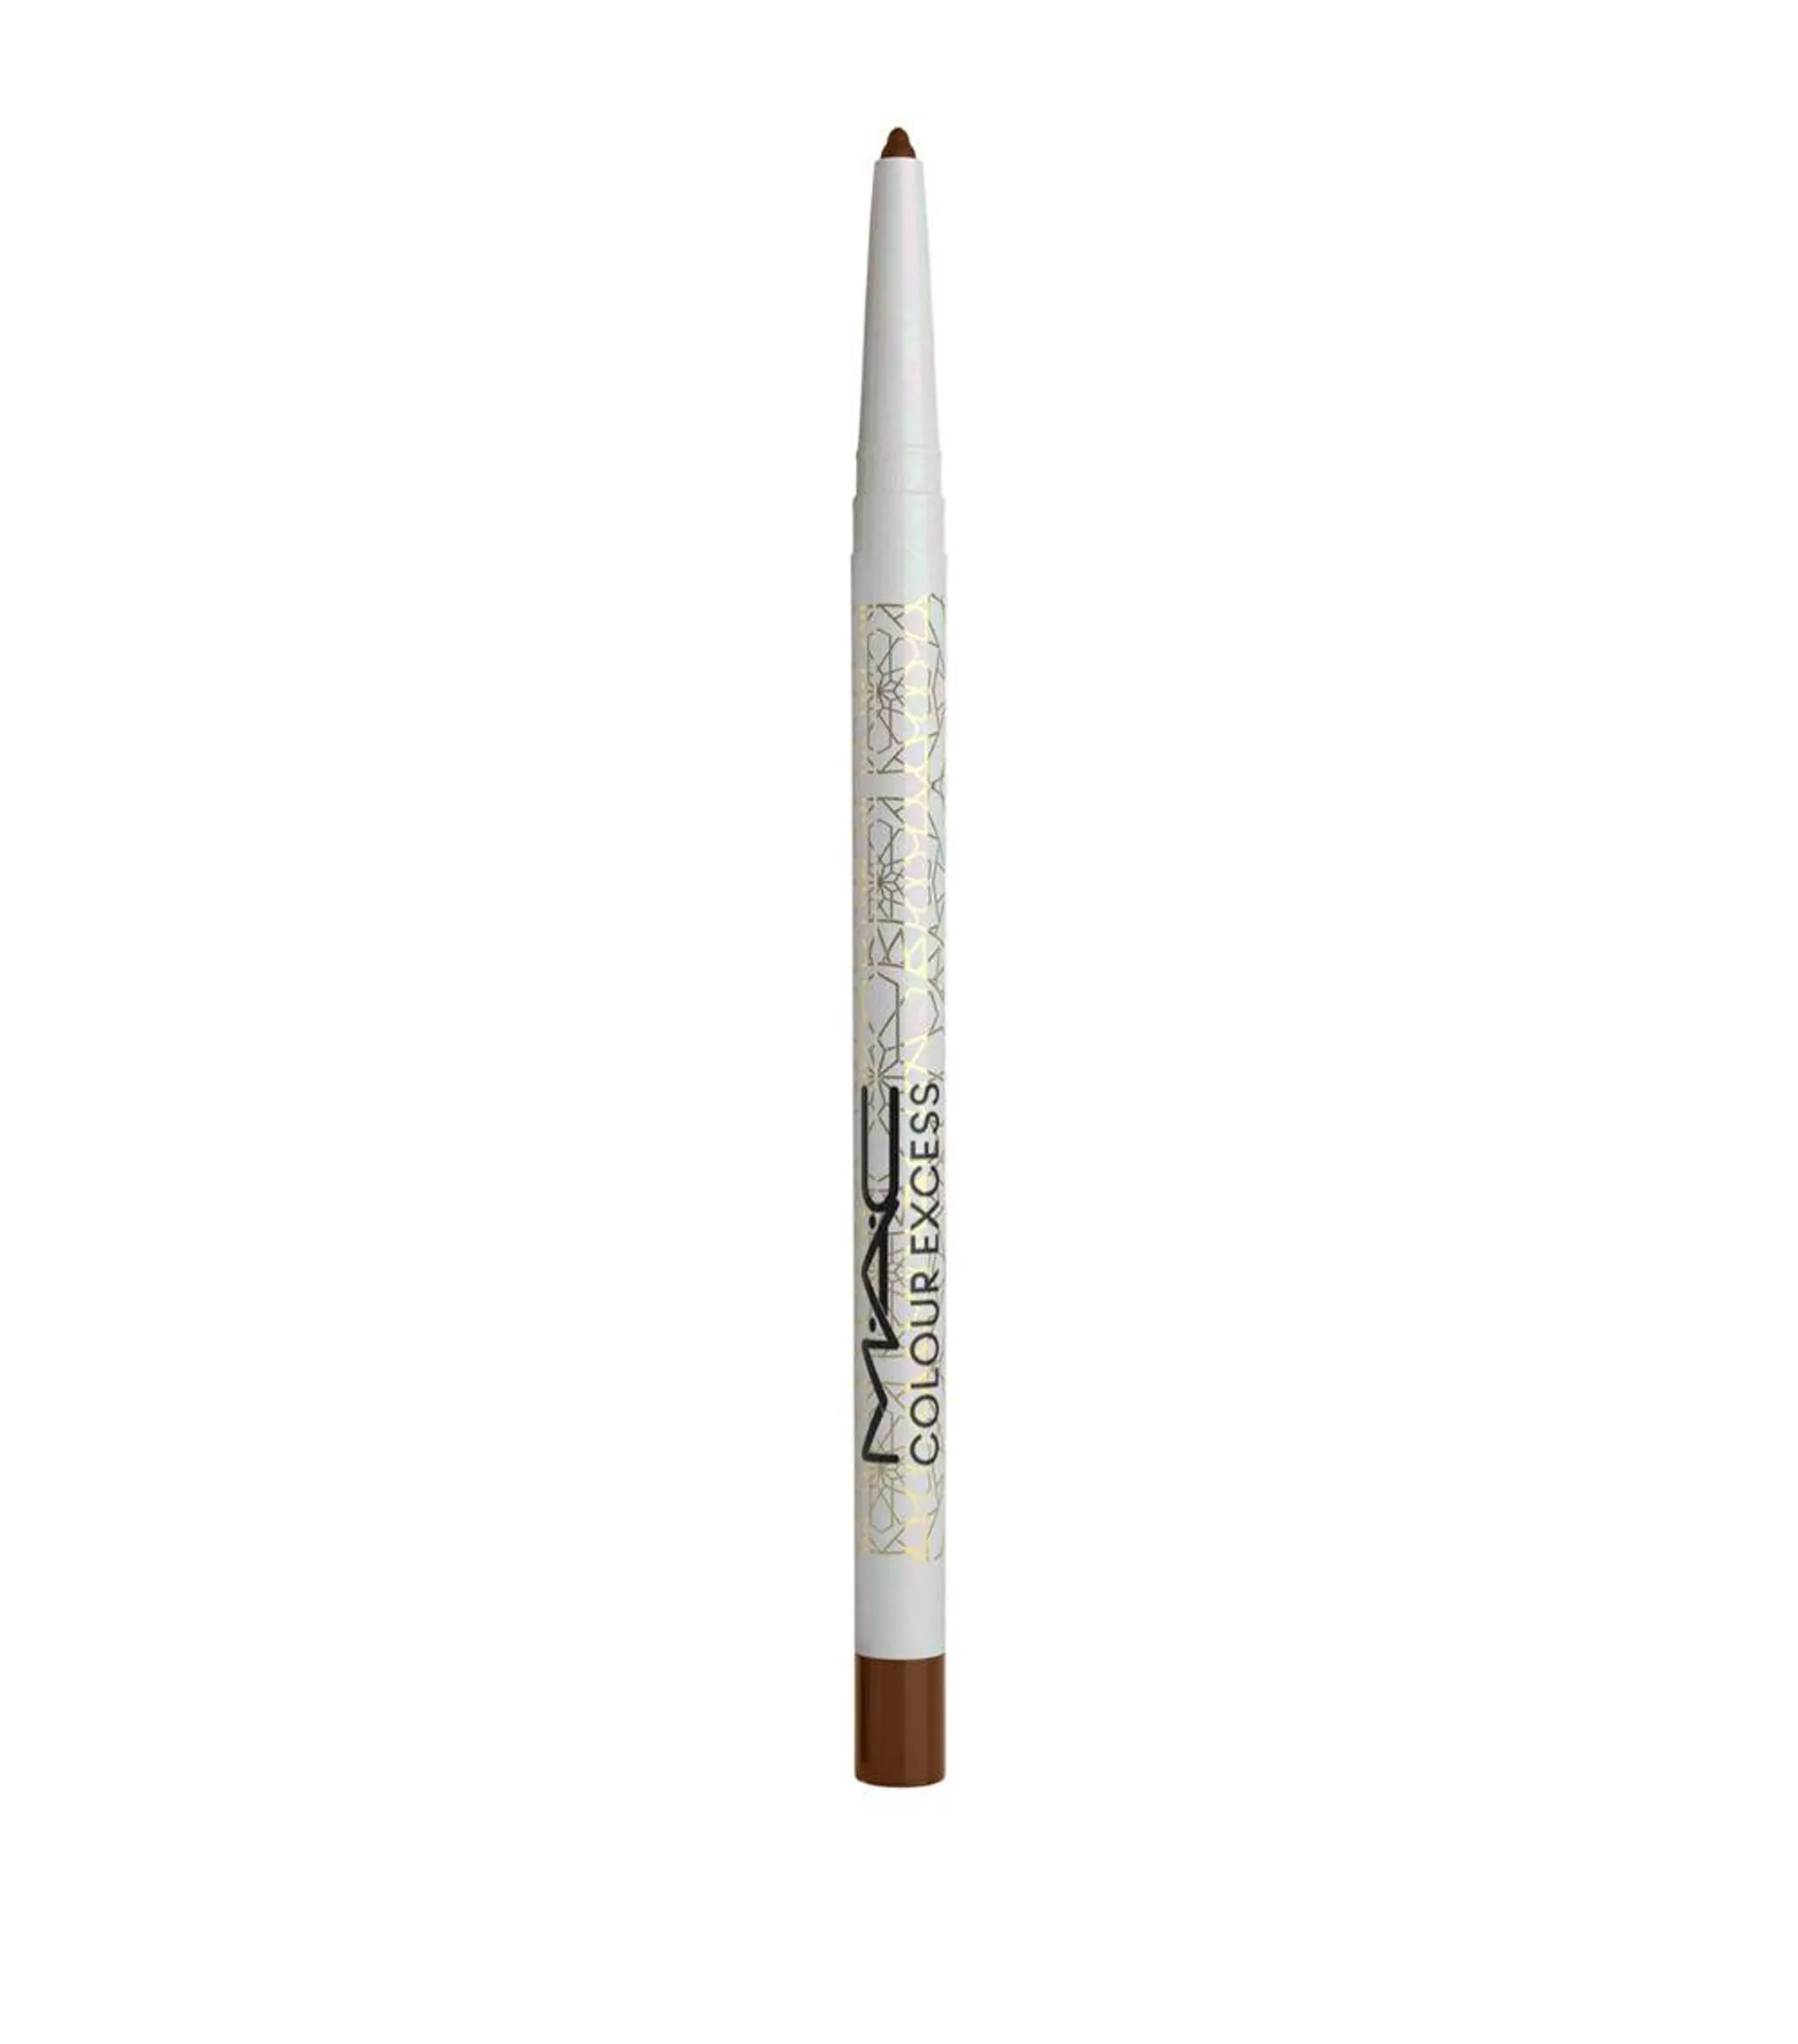 Pearlescence Colour Excess Gel Pencil Eyeliner